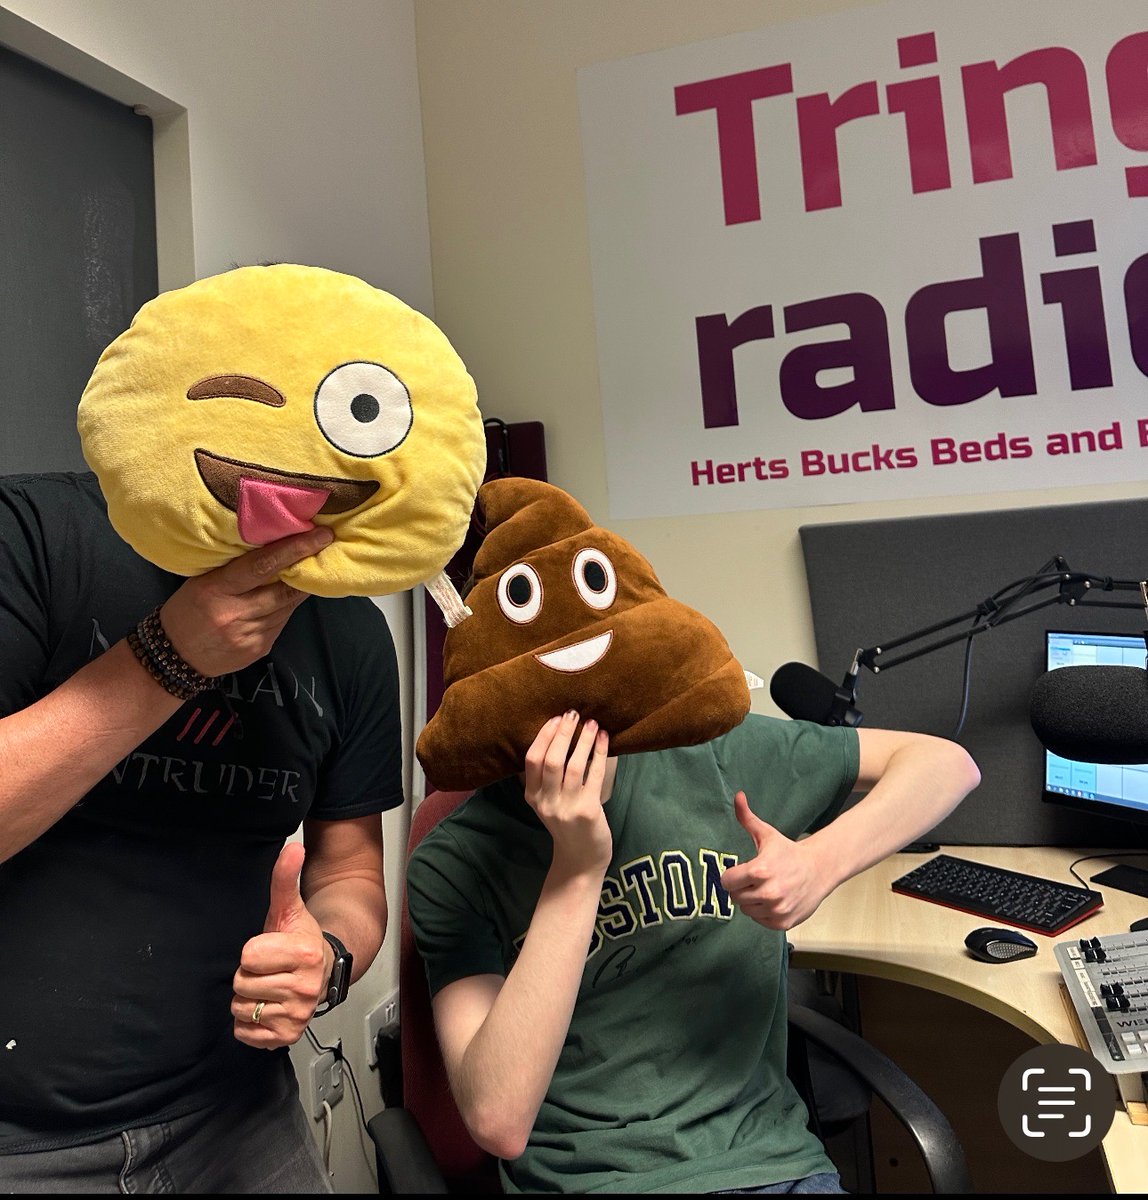 🎤😂🎙️The boys are here! Colin & Tom start your evening with an hour of hilarity and maybe even some music thrown in! Join us live on Tring Radio #TringRadio #Herts #Bucks #Beds #comedy #comedyradio #localradio #keepitlocal #liveradio #GaryNuman